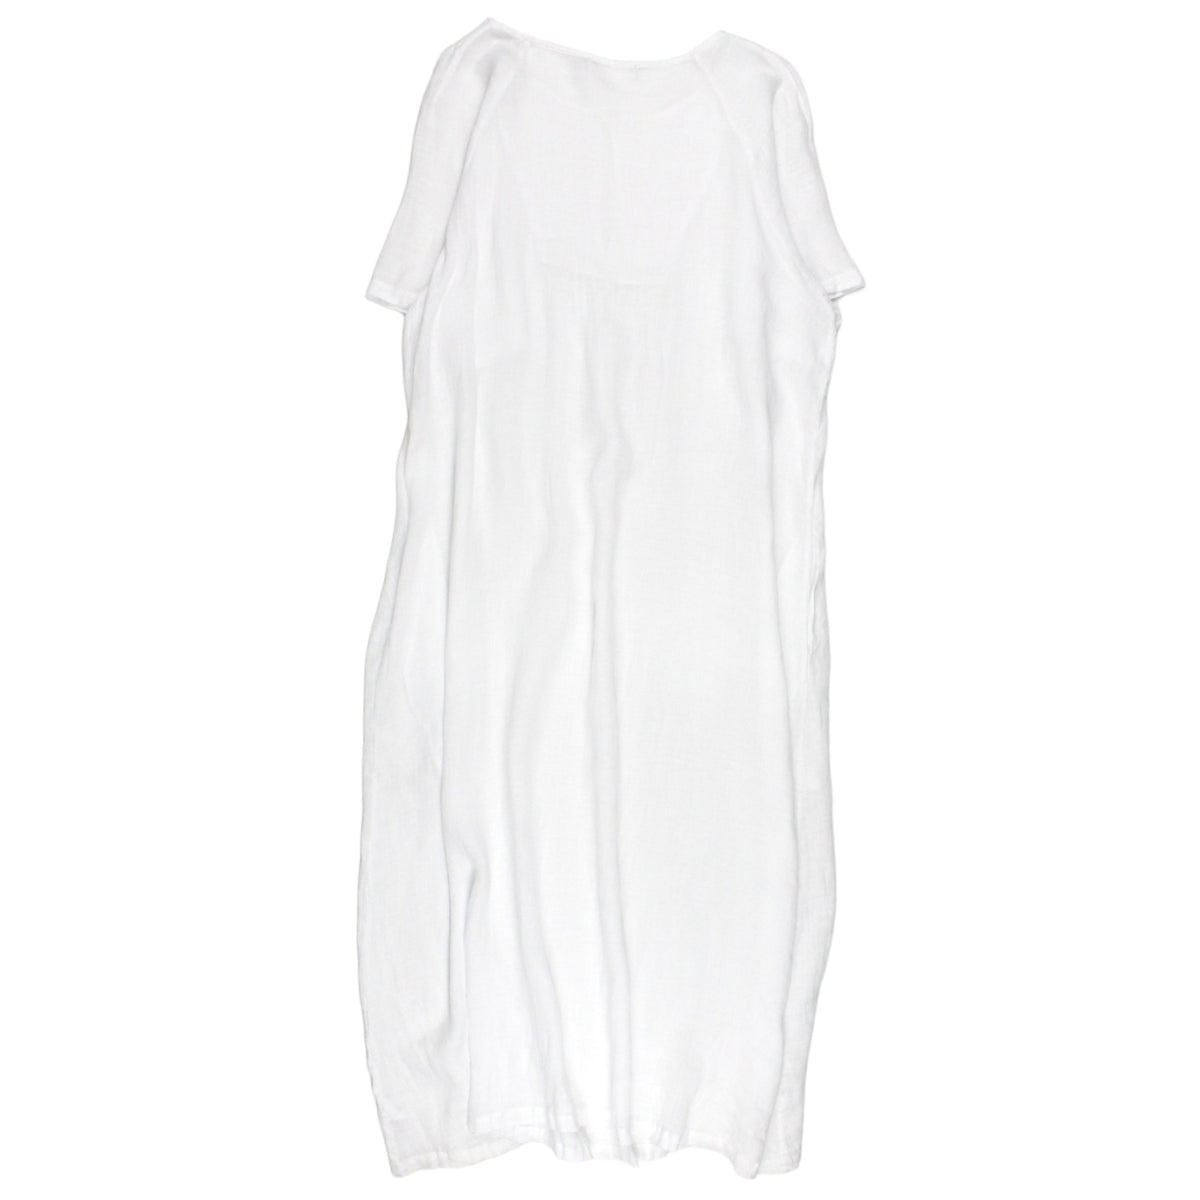 NRBY White Loose Weave Linen Maxi Dress - Sample